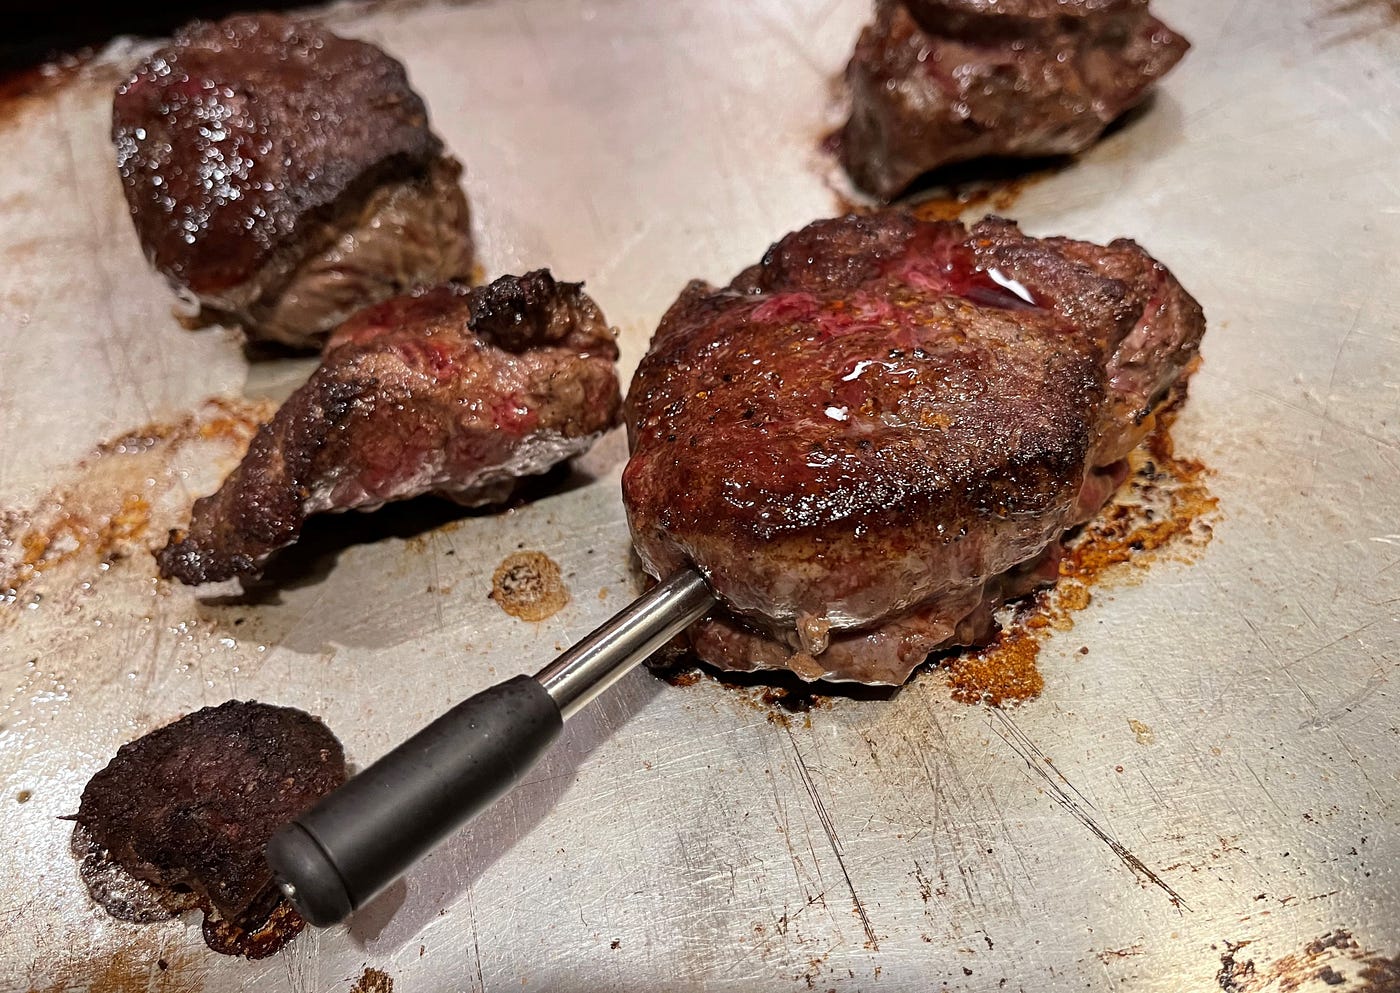 Yummly Smart Thermometer Review: Takes the Temperature Guesswork out of  Cooking